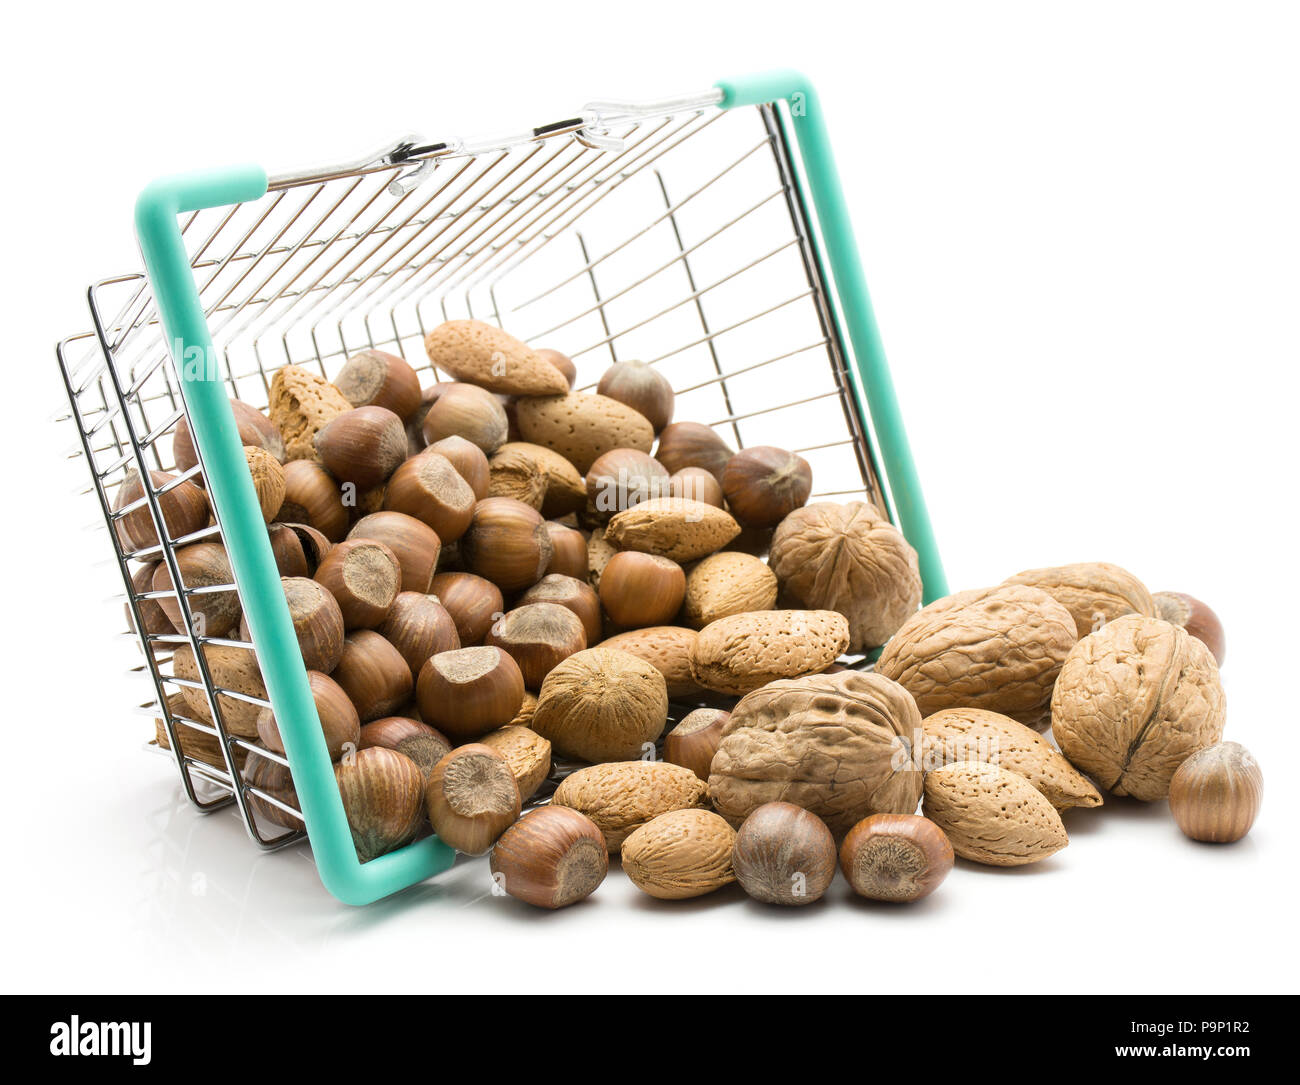 Nuts mix (walnut, hazelnut and almond) out a shopping basket isolated on white background Stock Photo